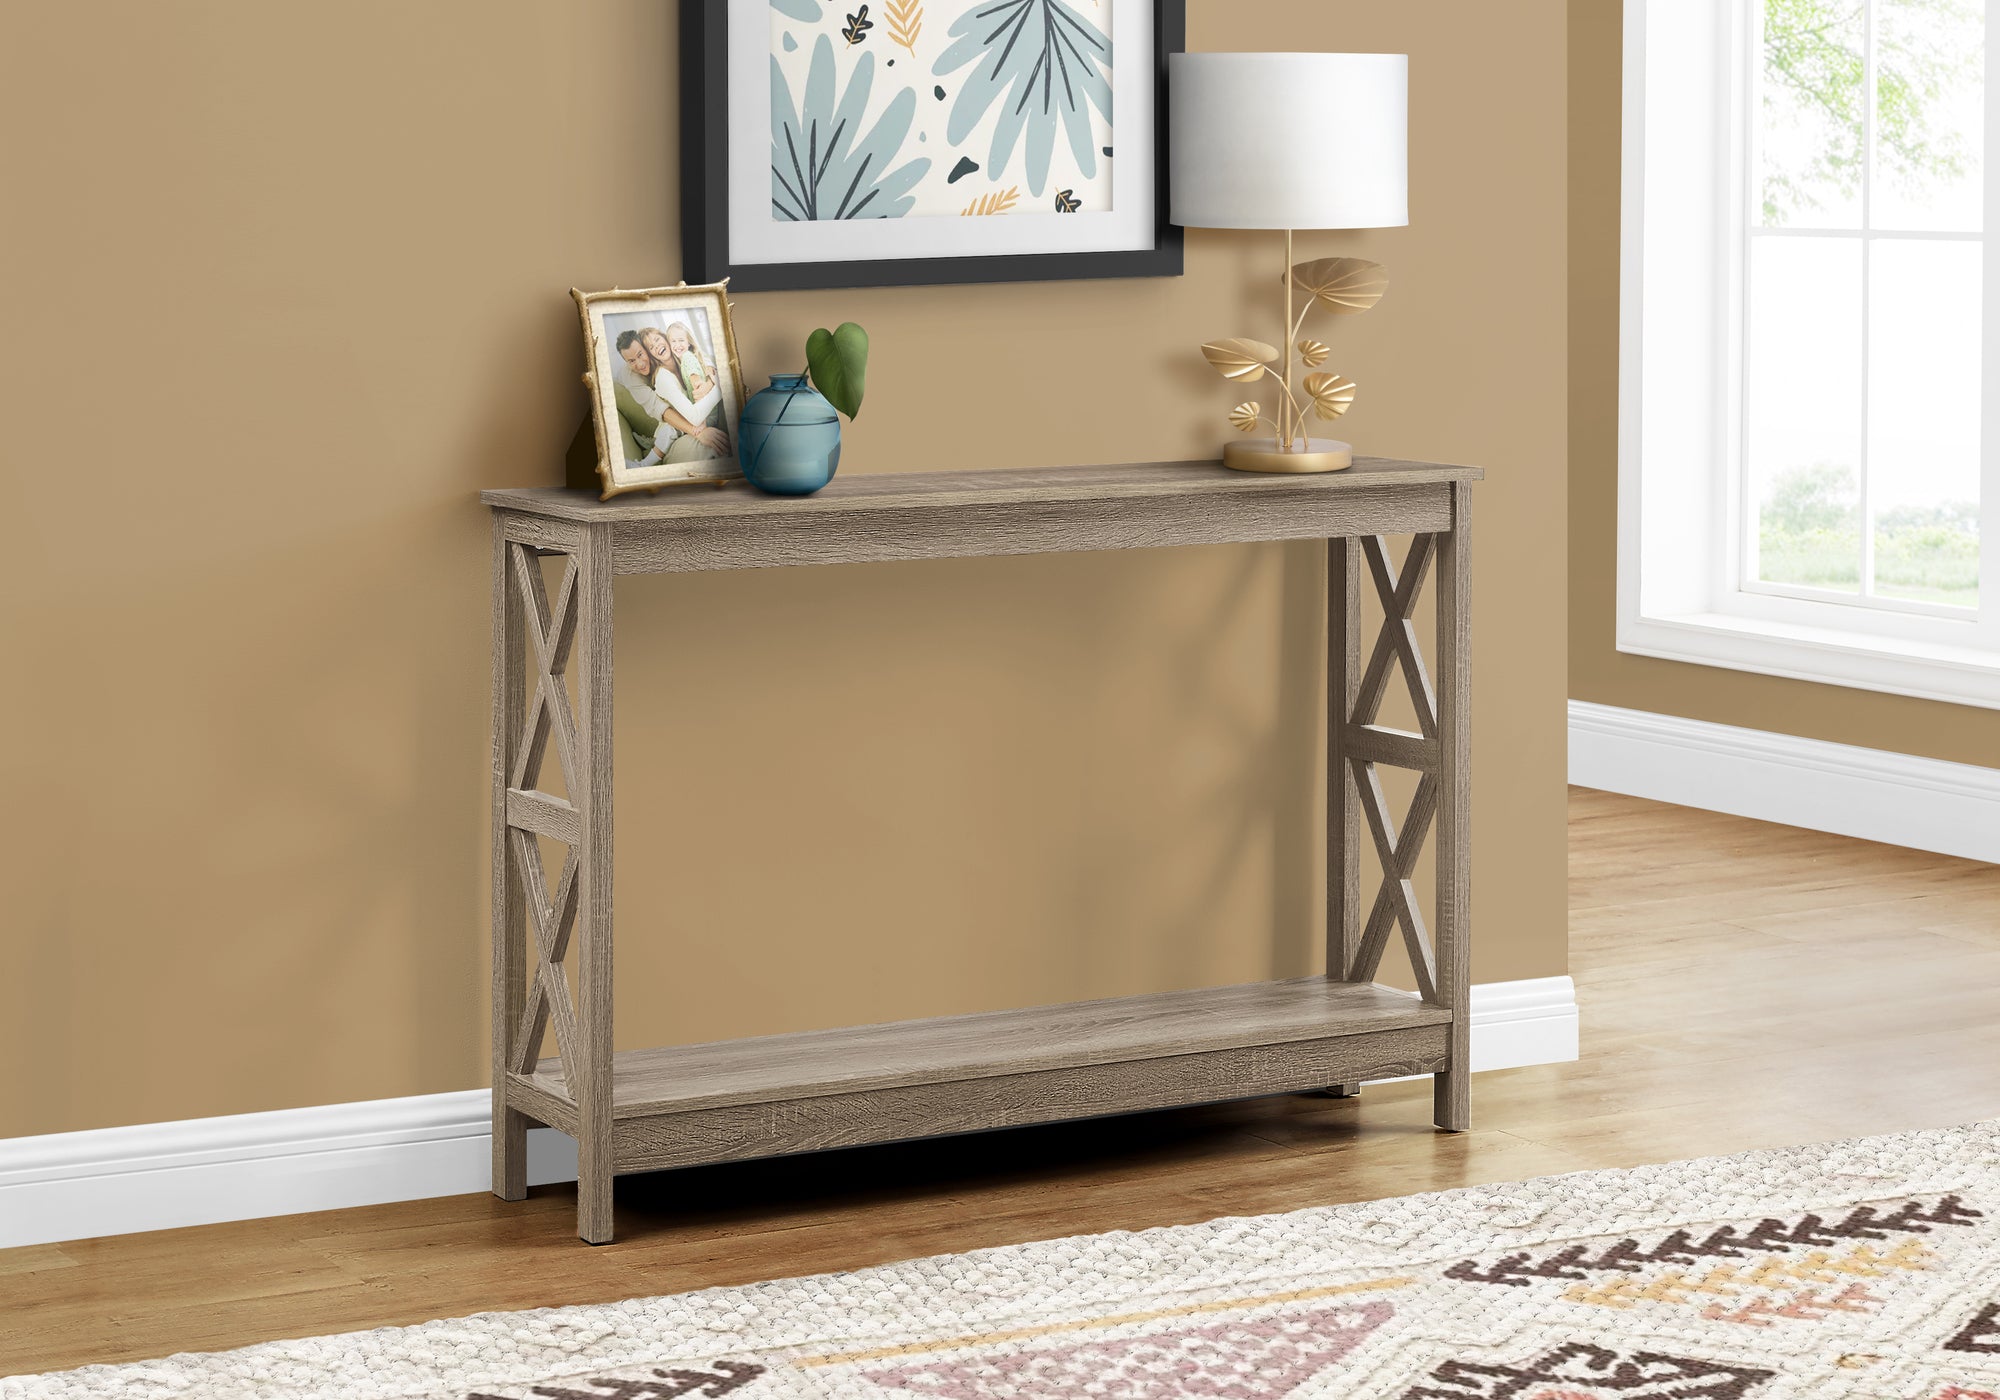 I 2791 - ACCENT TABLE - 48"L / DARK TAUPE HALL CONSOLE BY MONARCH SPECIALTIES INC